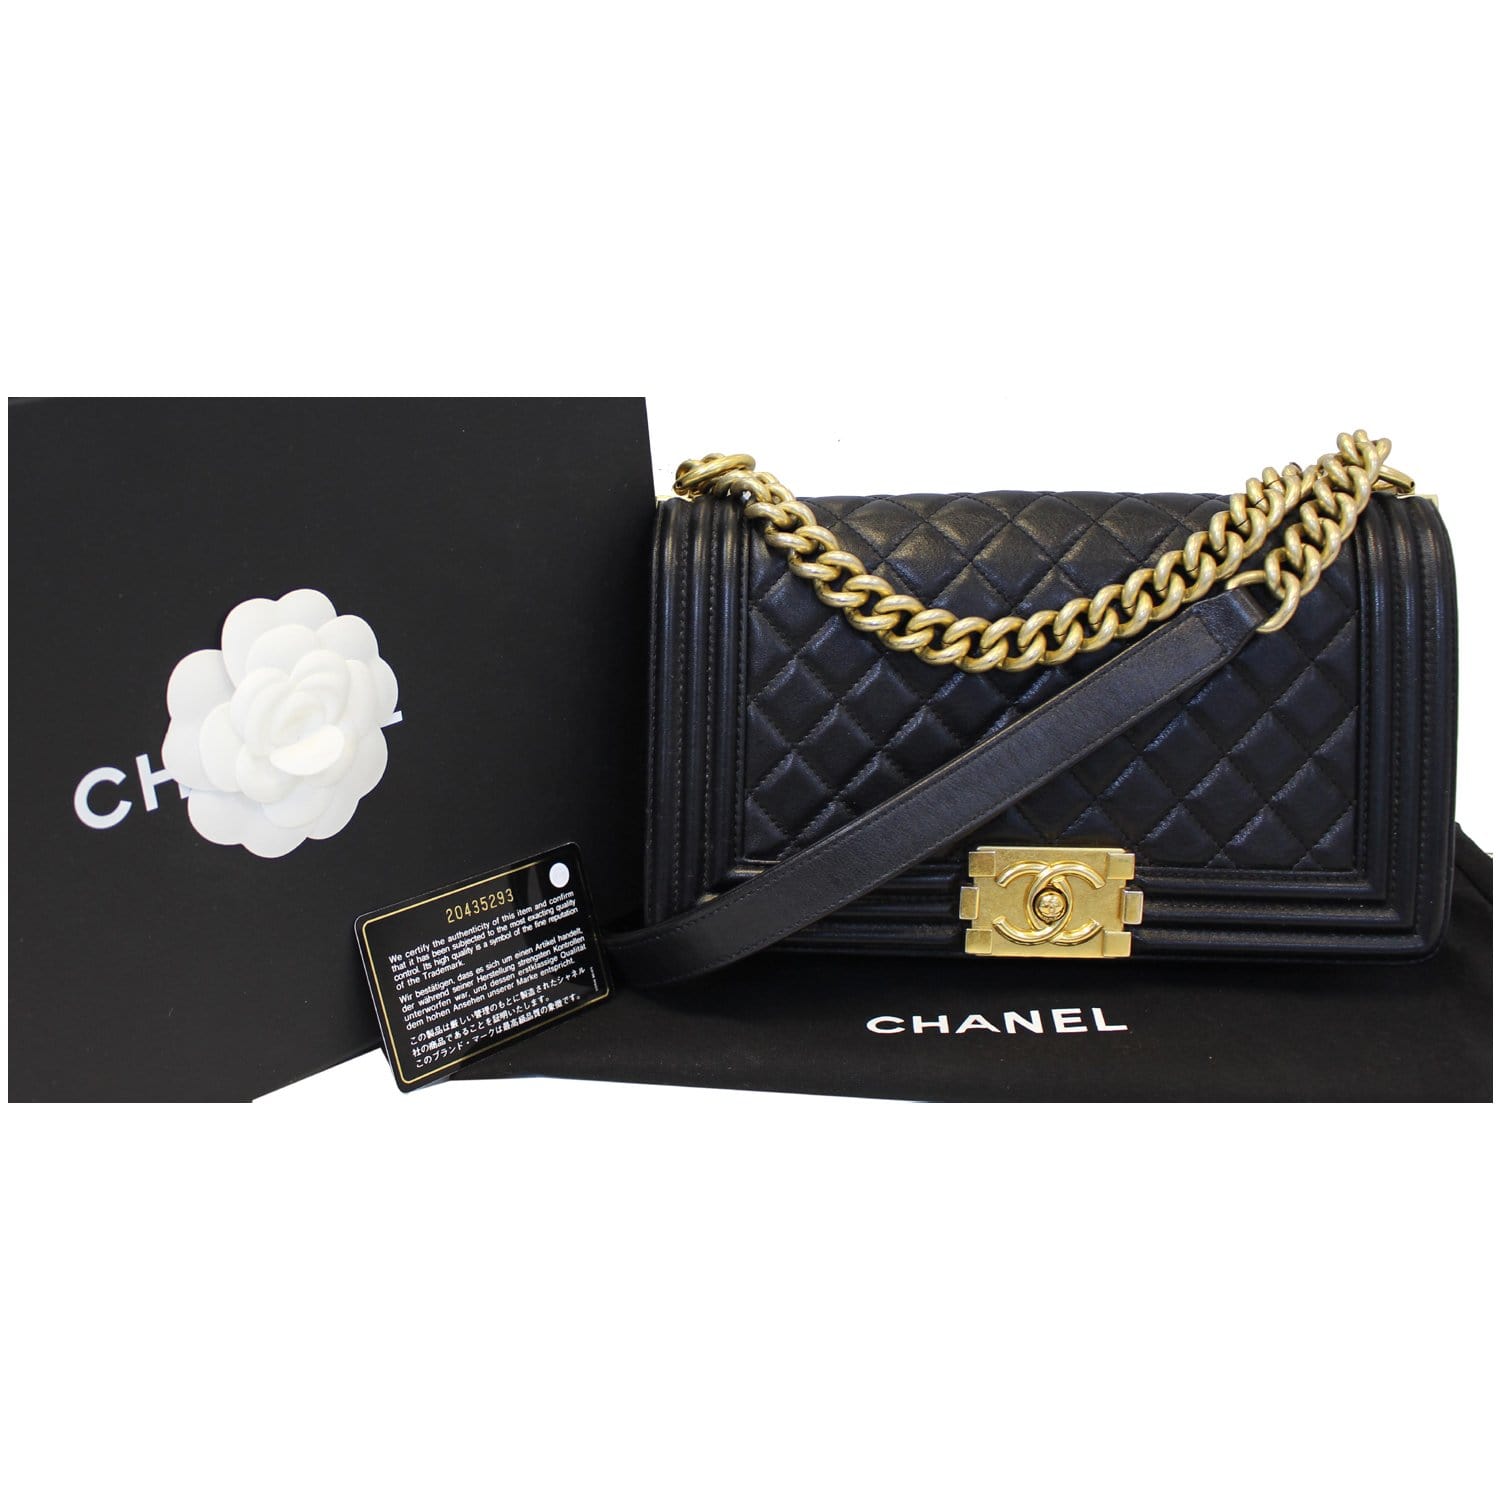 Chanel Le Boy Old Medium Black Quilted Calfskin with brushed gold hardware